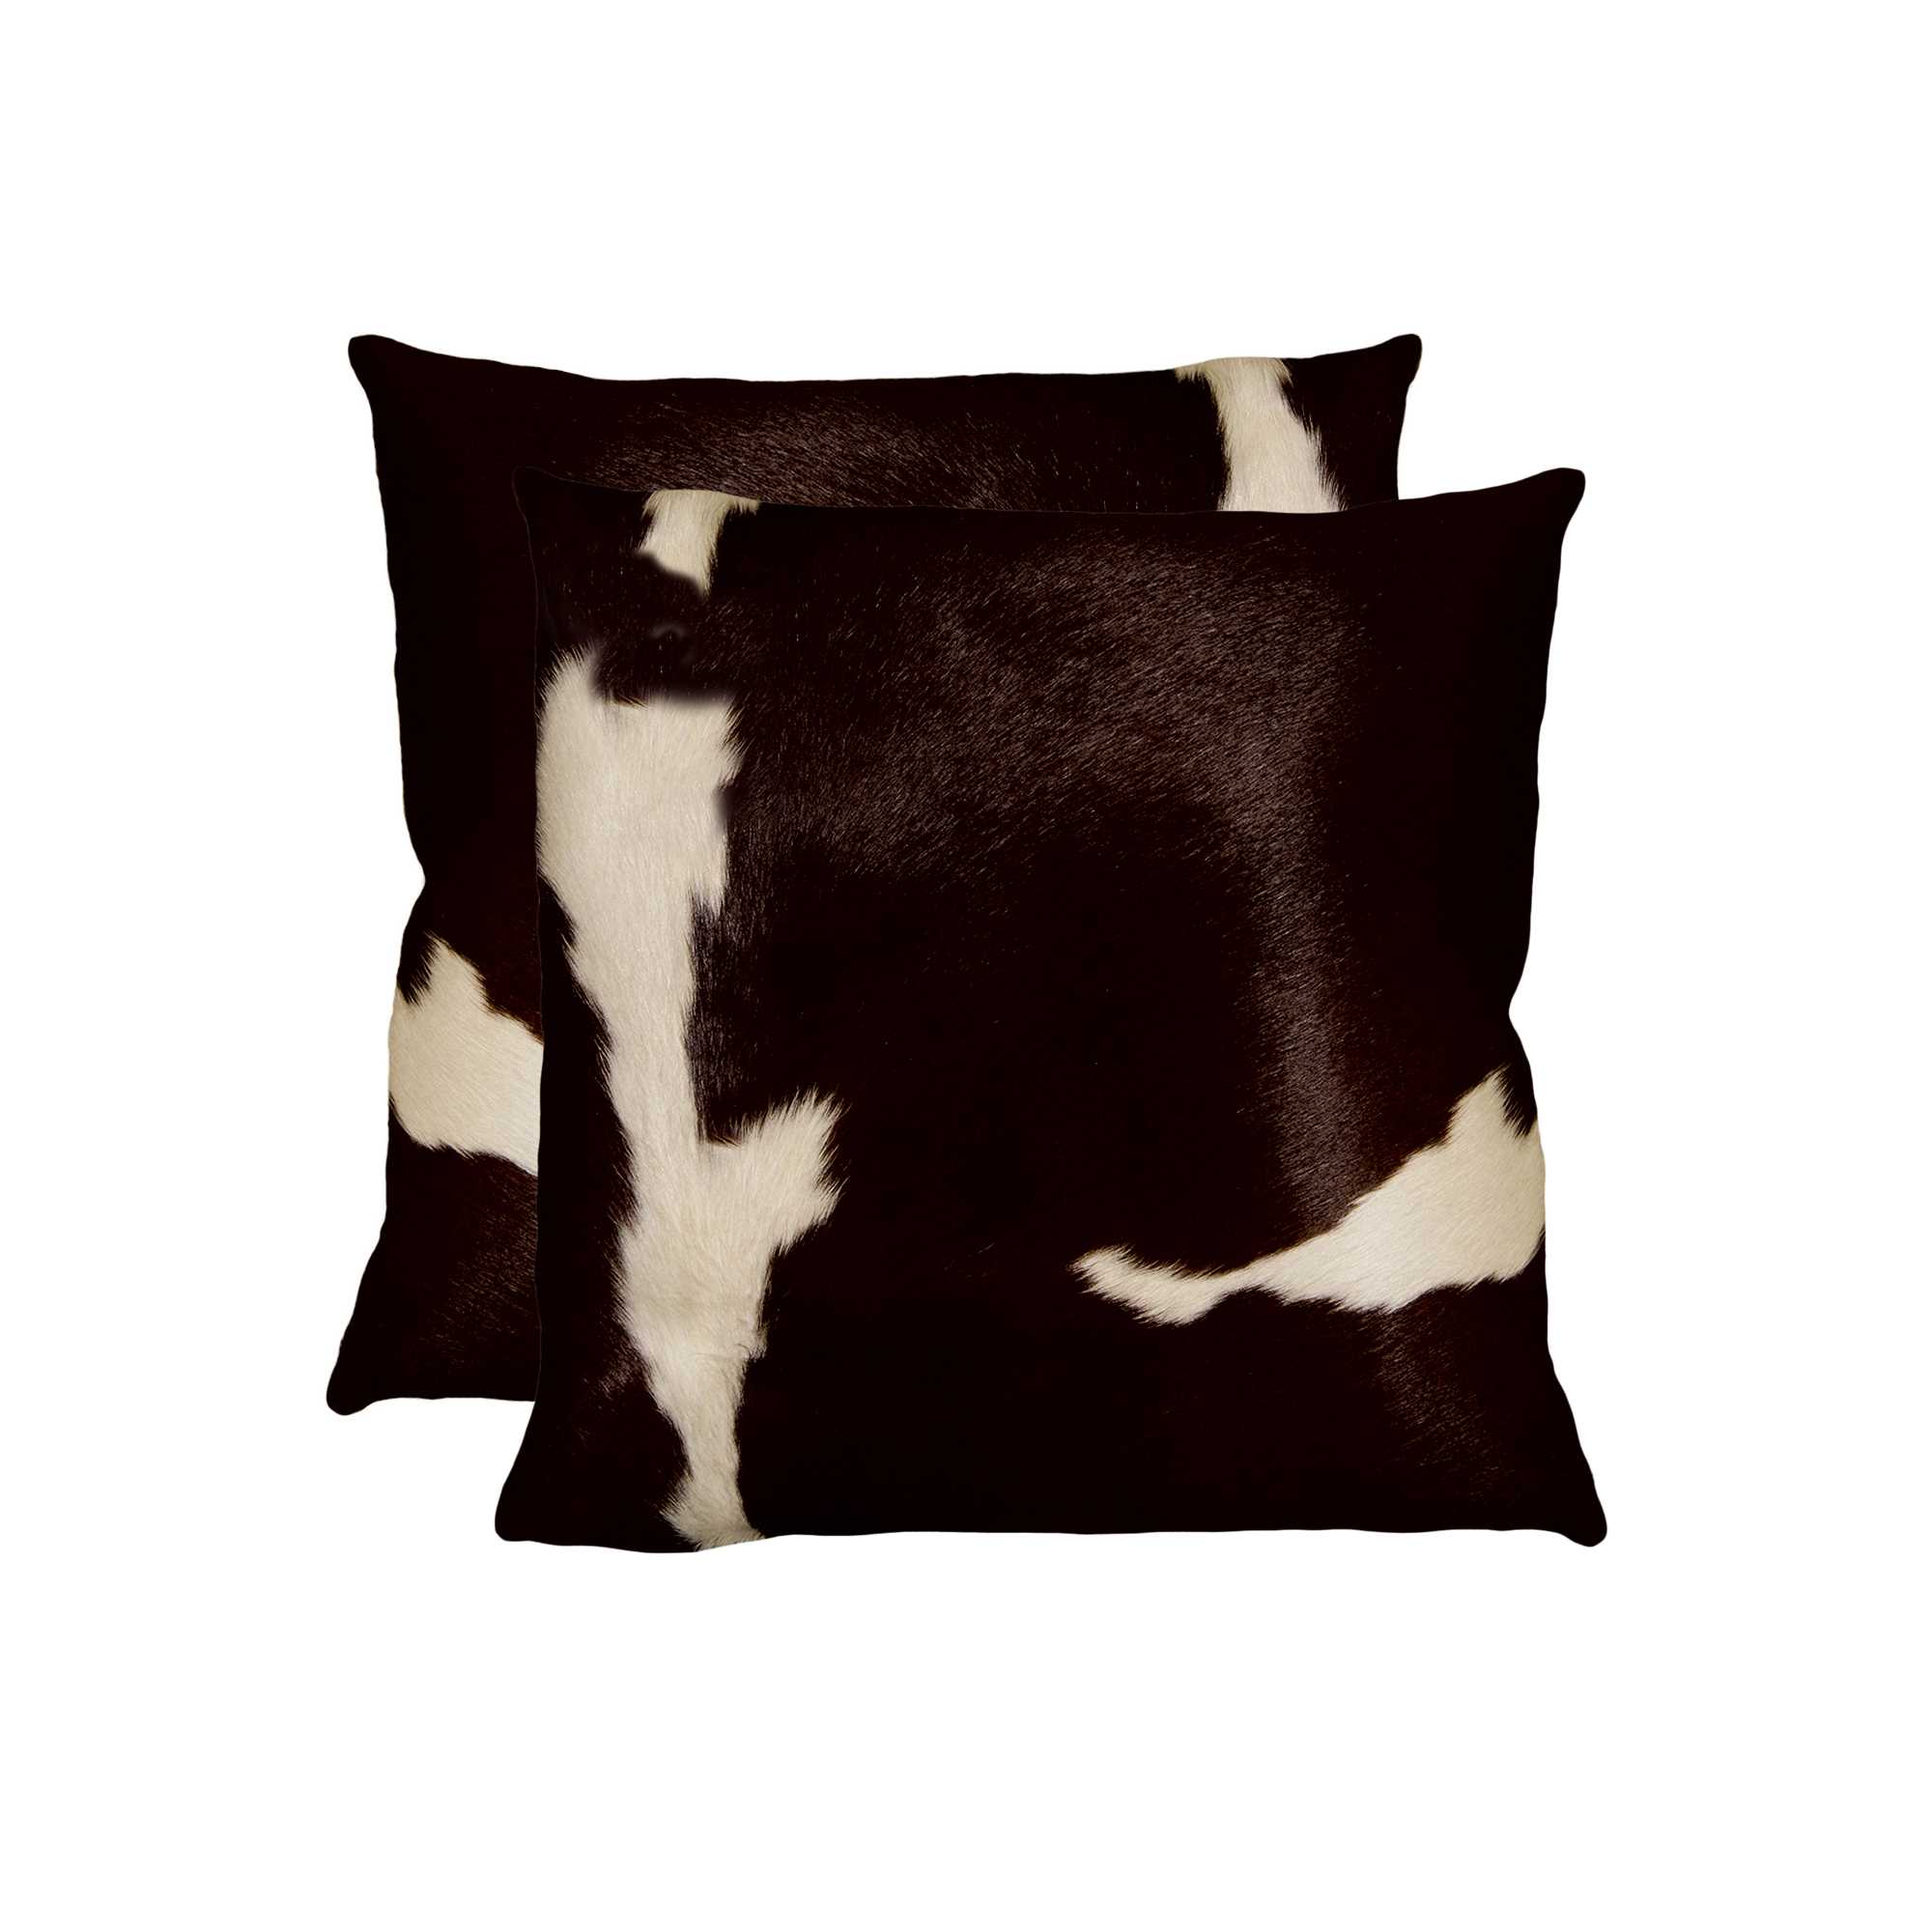 18" x 18" x 5" Chocolate And White Cowhide - Pillow 2-Pack